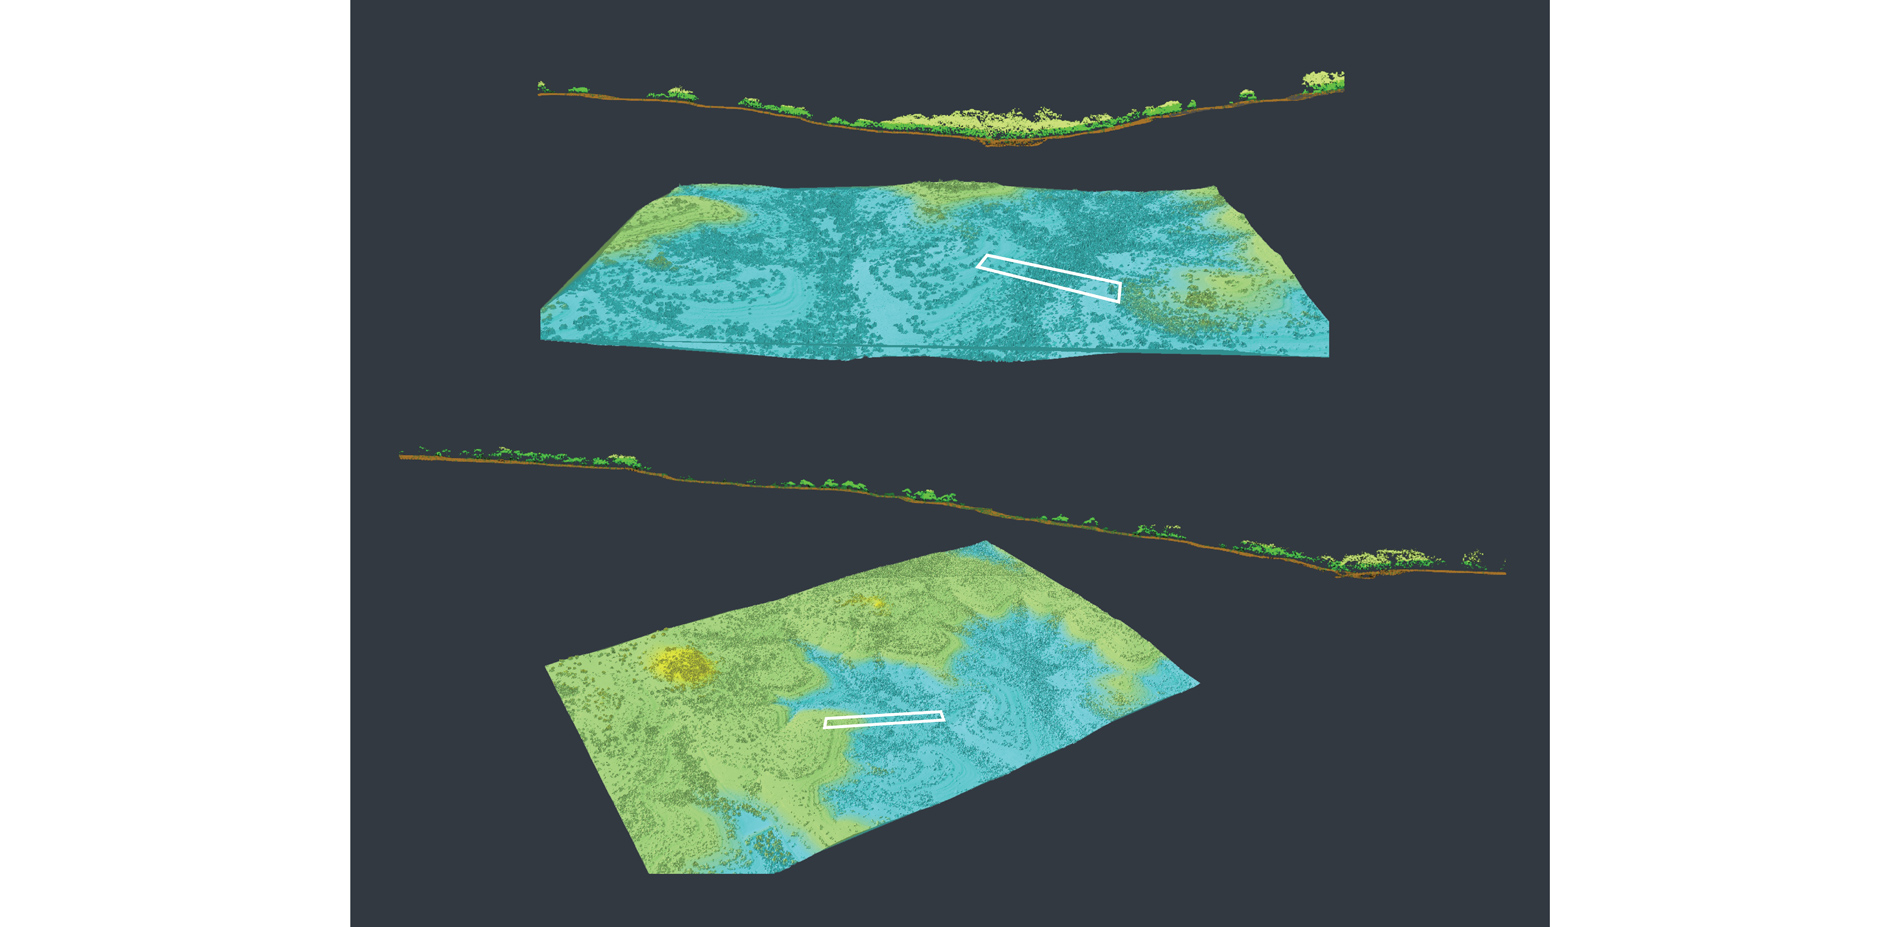 High-resolution point-cloud data was derived from LIDAR to model topography and vegetation. This data served as an invaluable tool for modeling water …